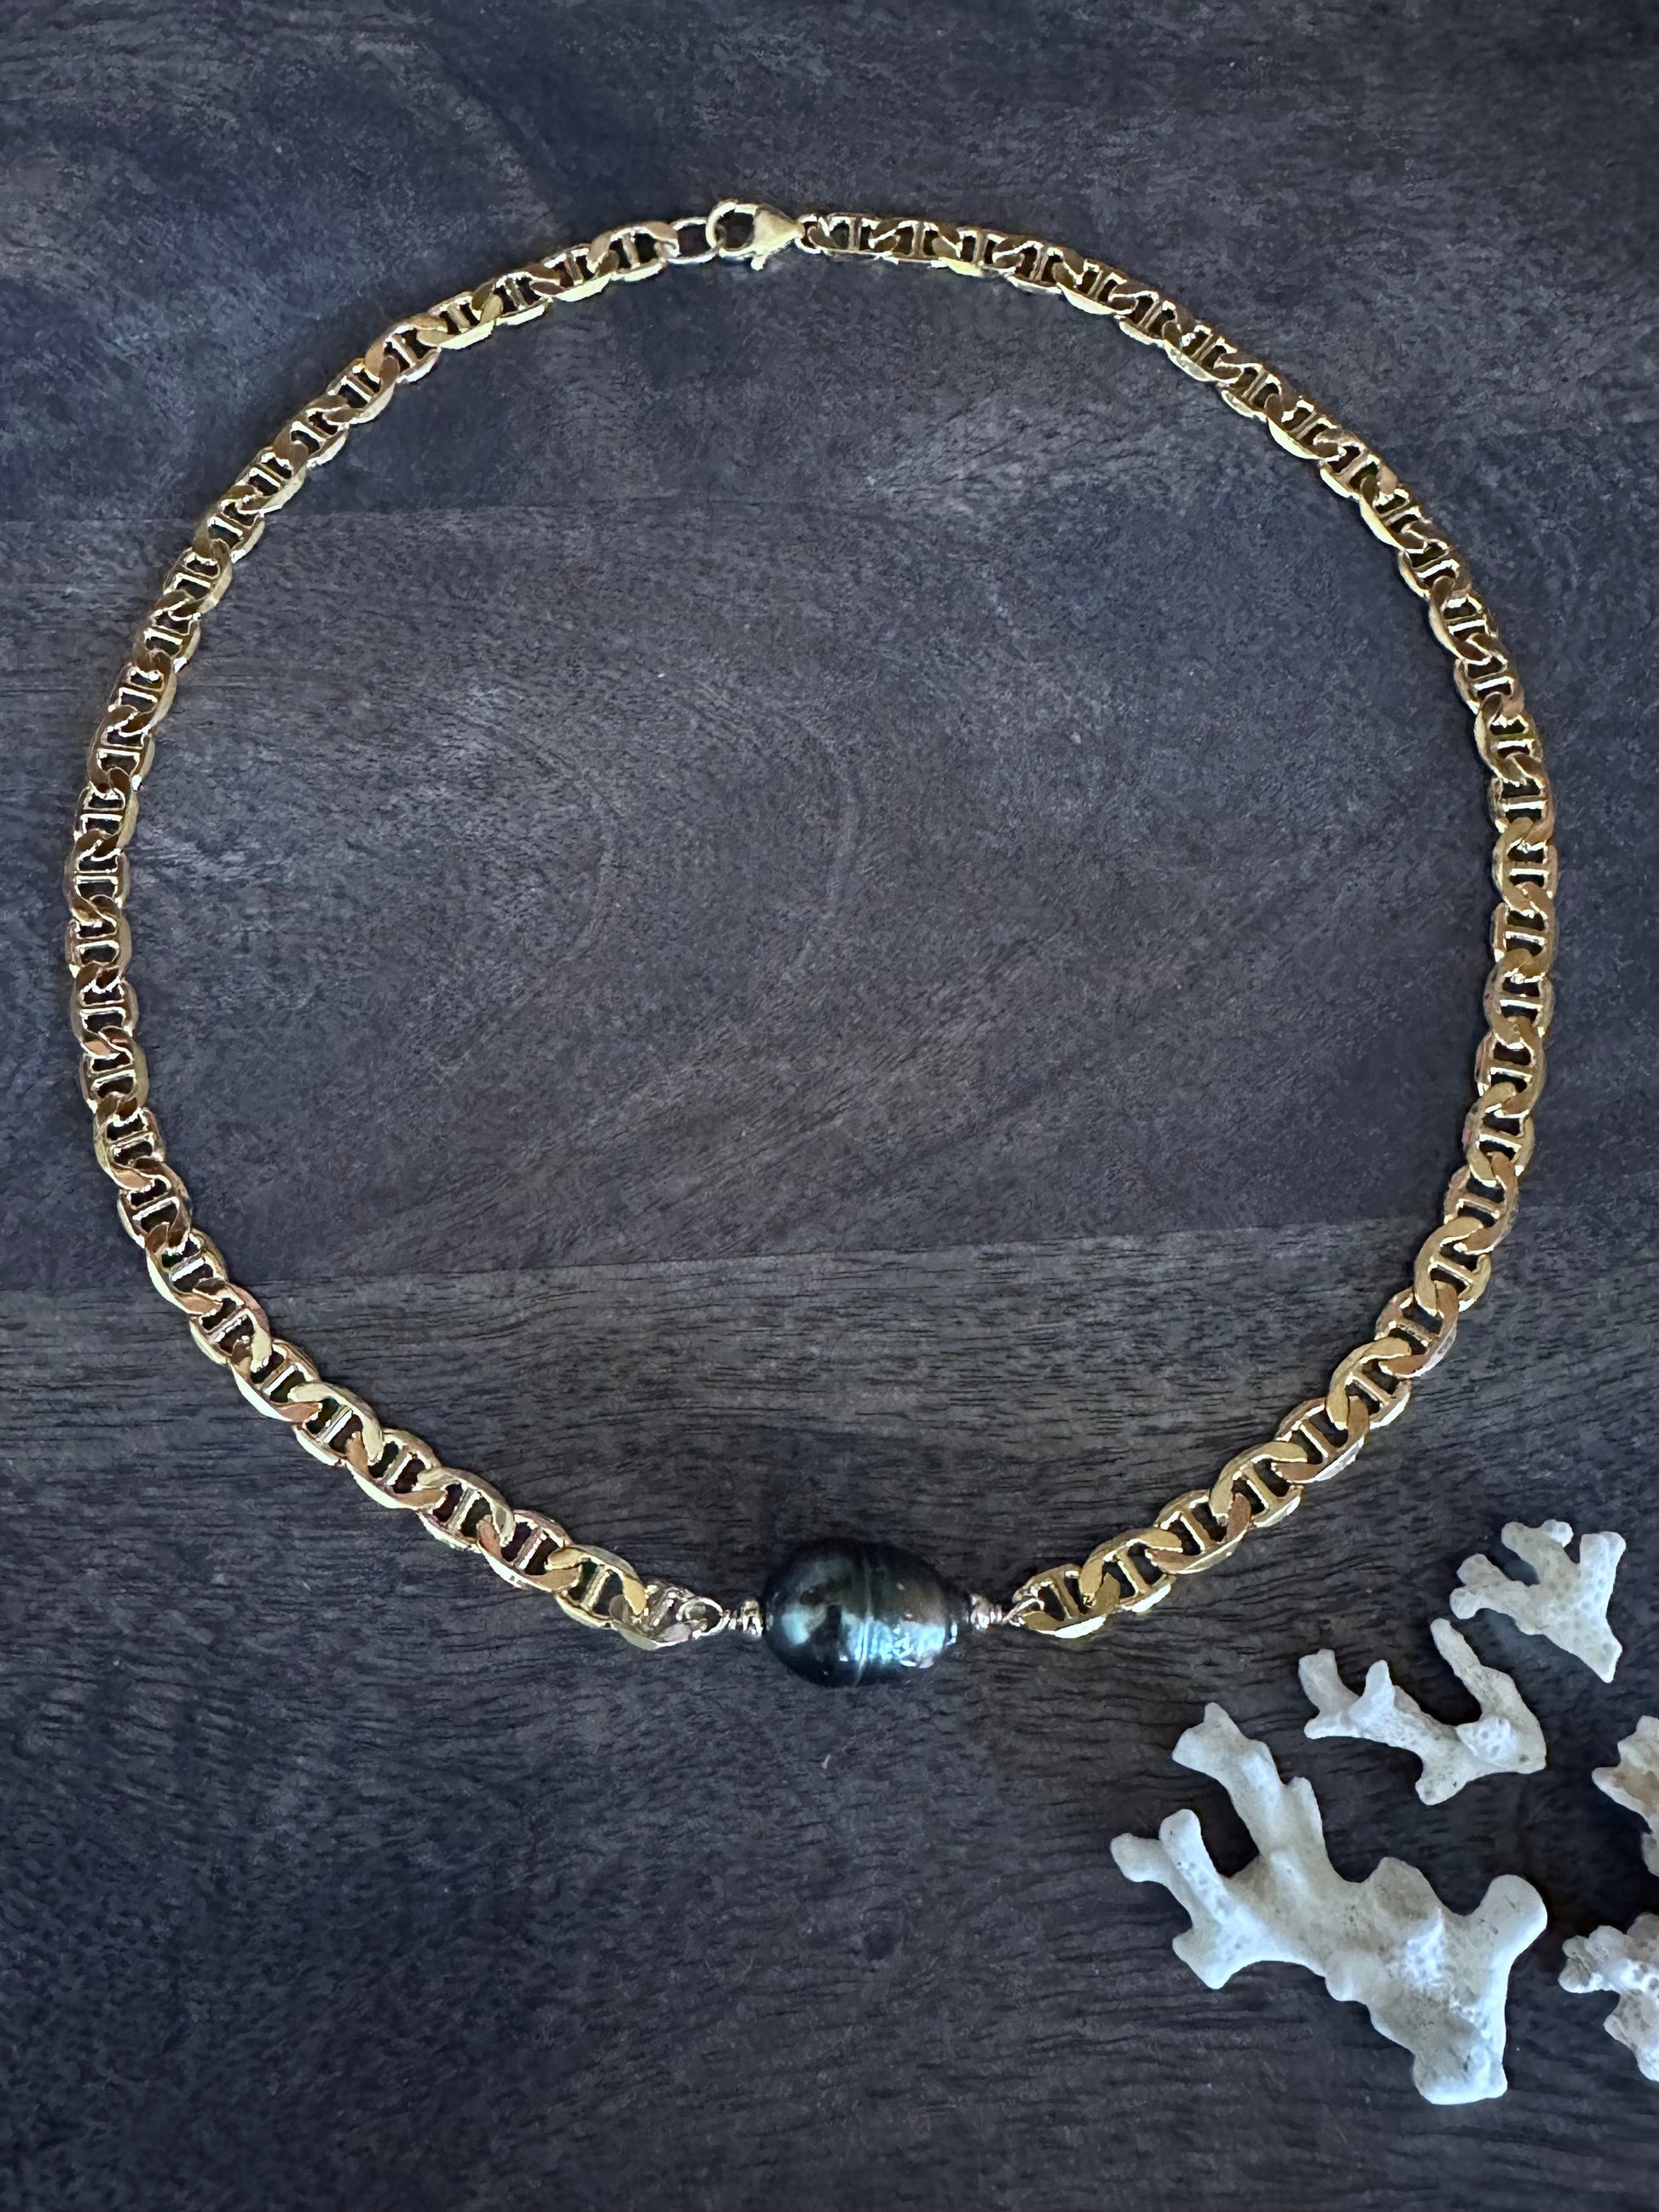 a large flat gold neckalce lays in a circle on a grey wooden background with a large tahitian pearl as the center piece. there are small pieces of white coral in the lower right hand corner of the image.